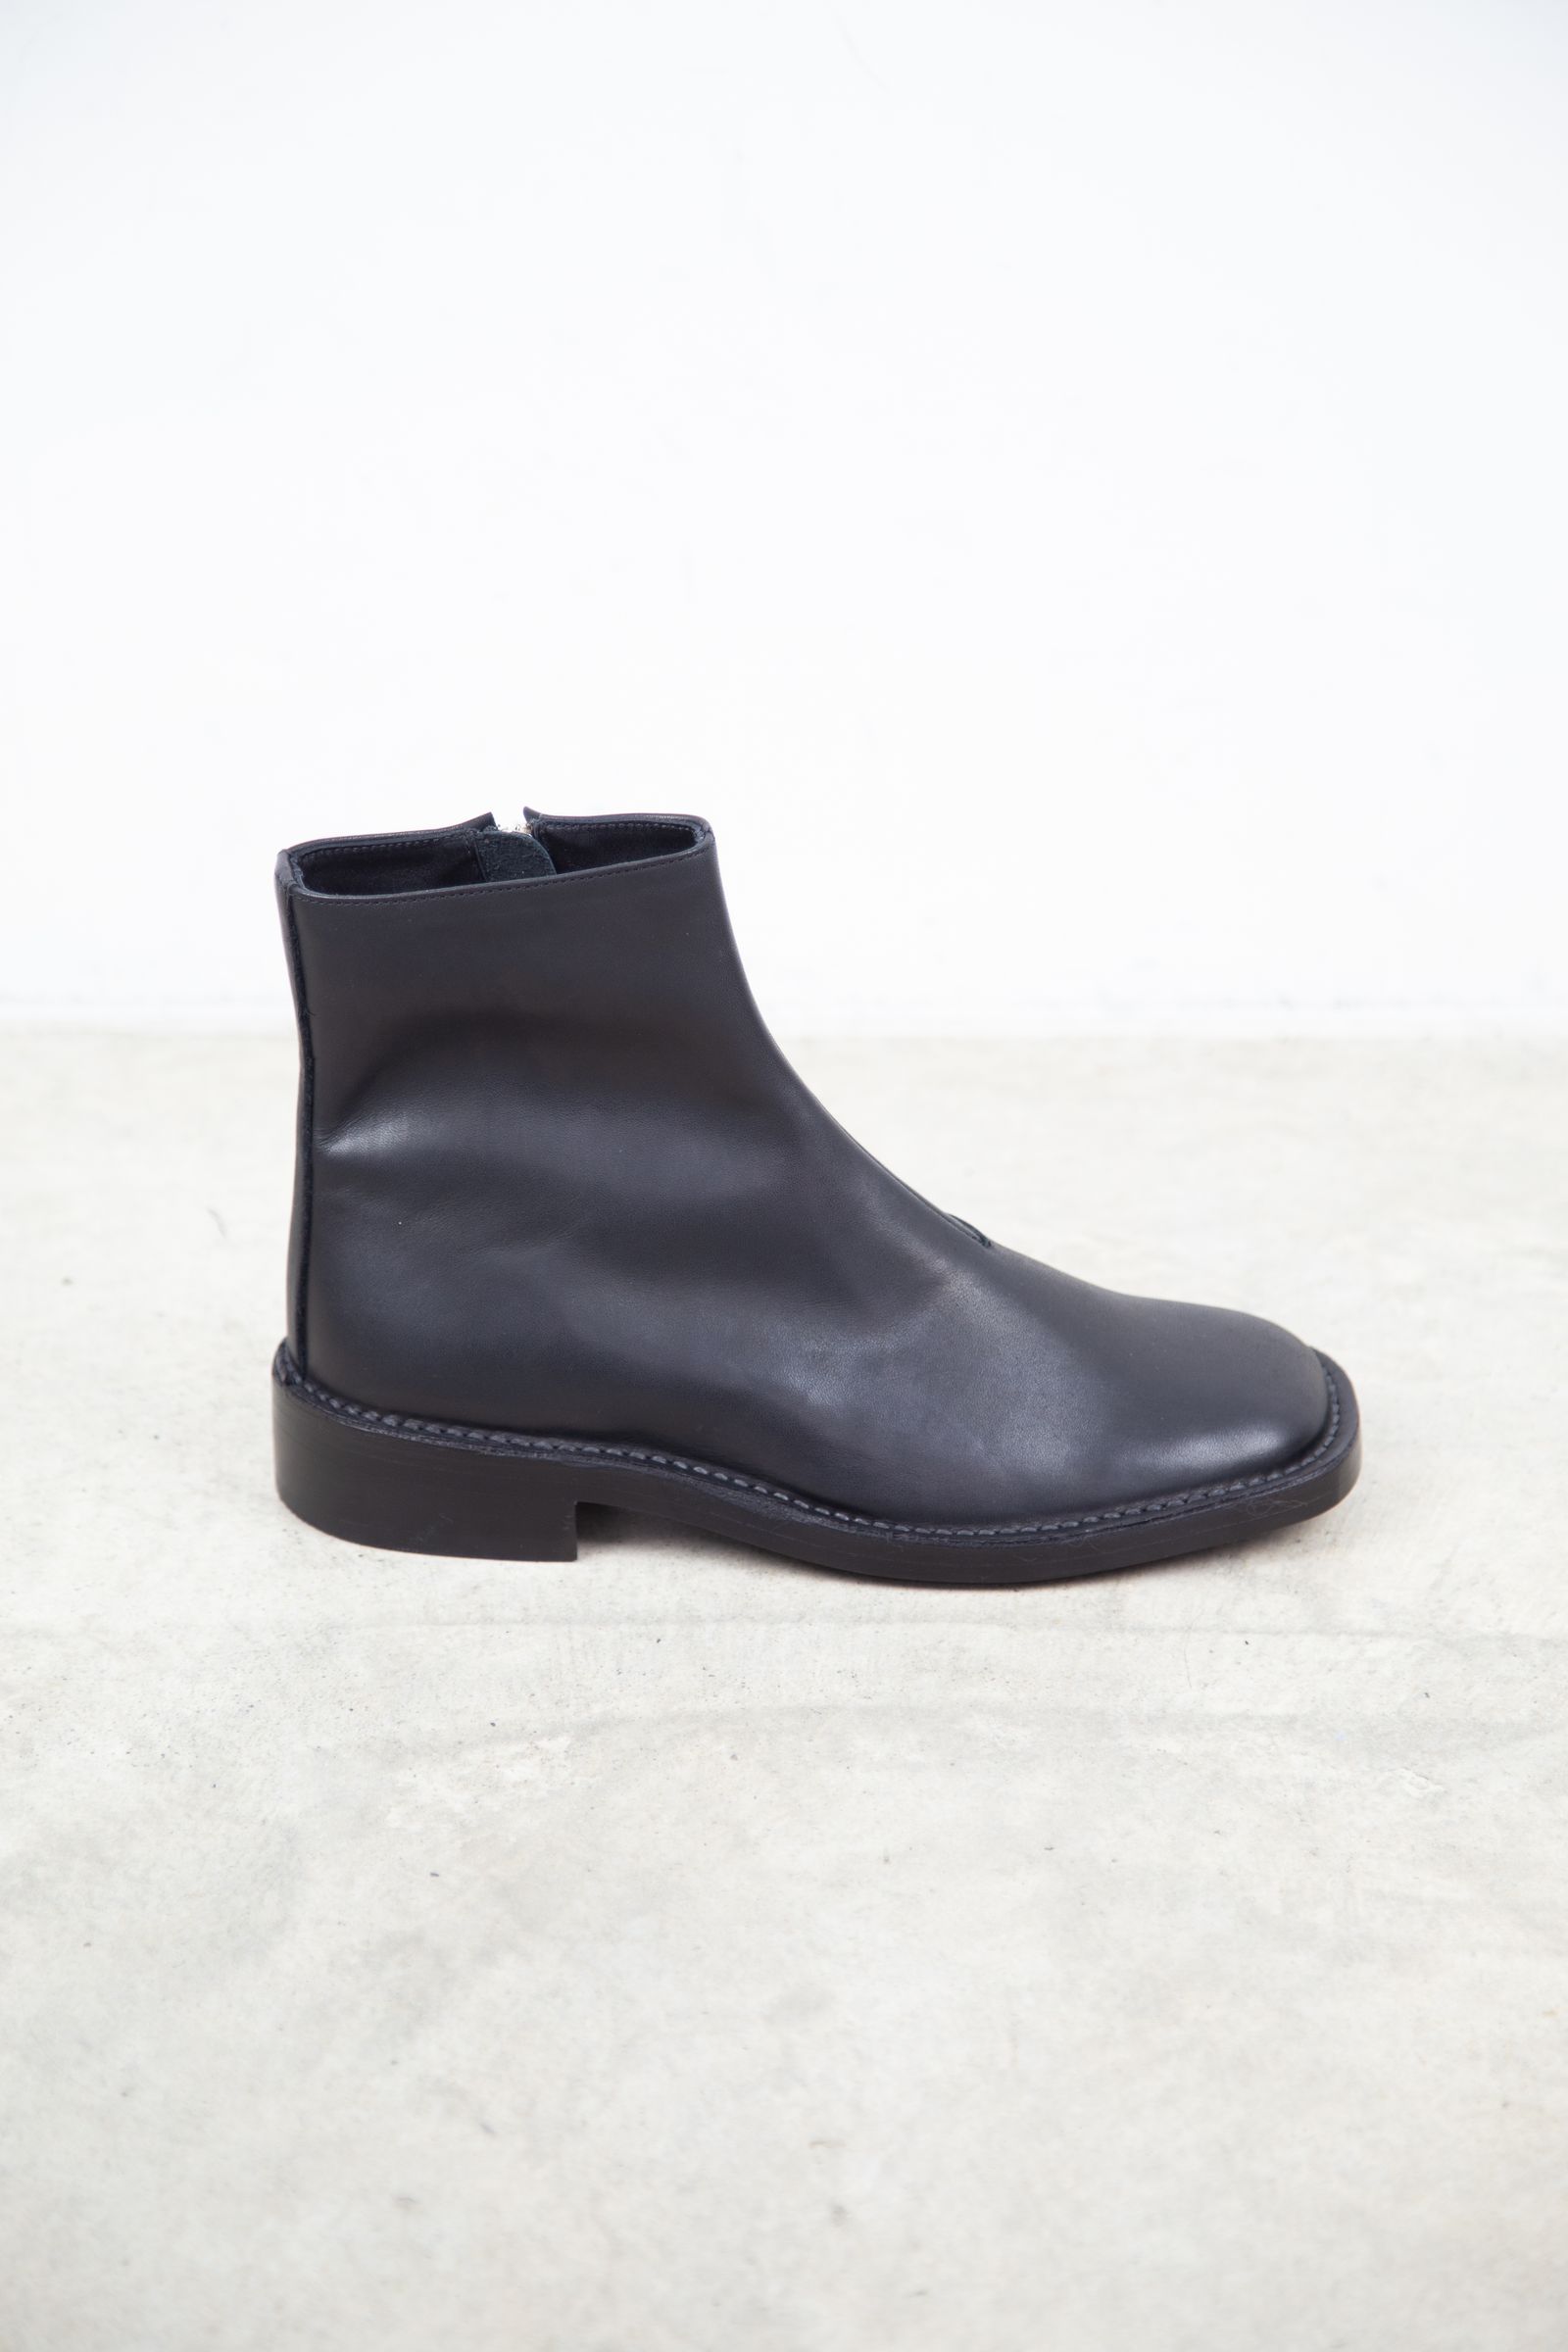 ATTACHMENT - COW LEATHER SIDE ZIP BOOTS / ブラック | Tempt